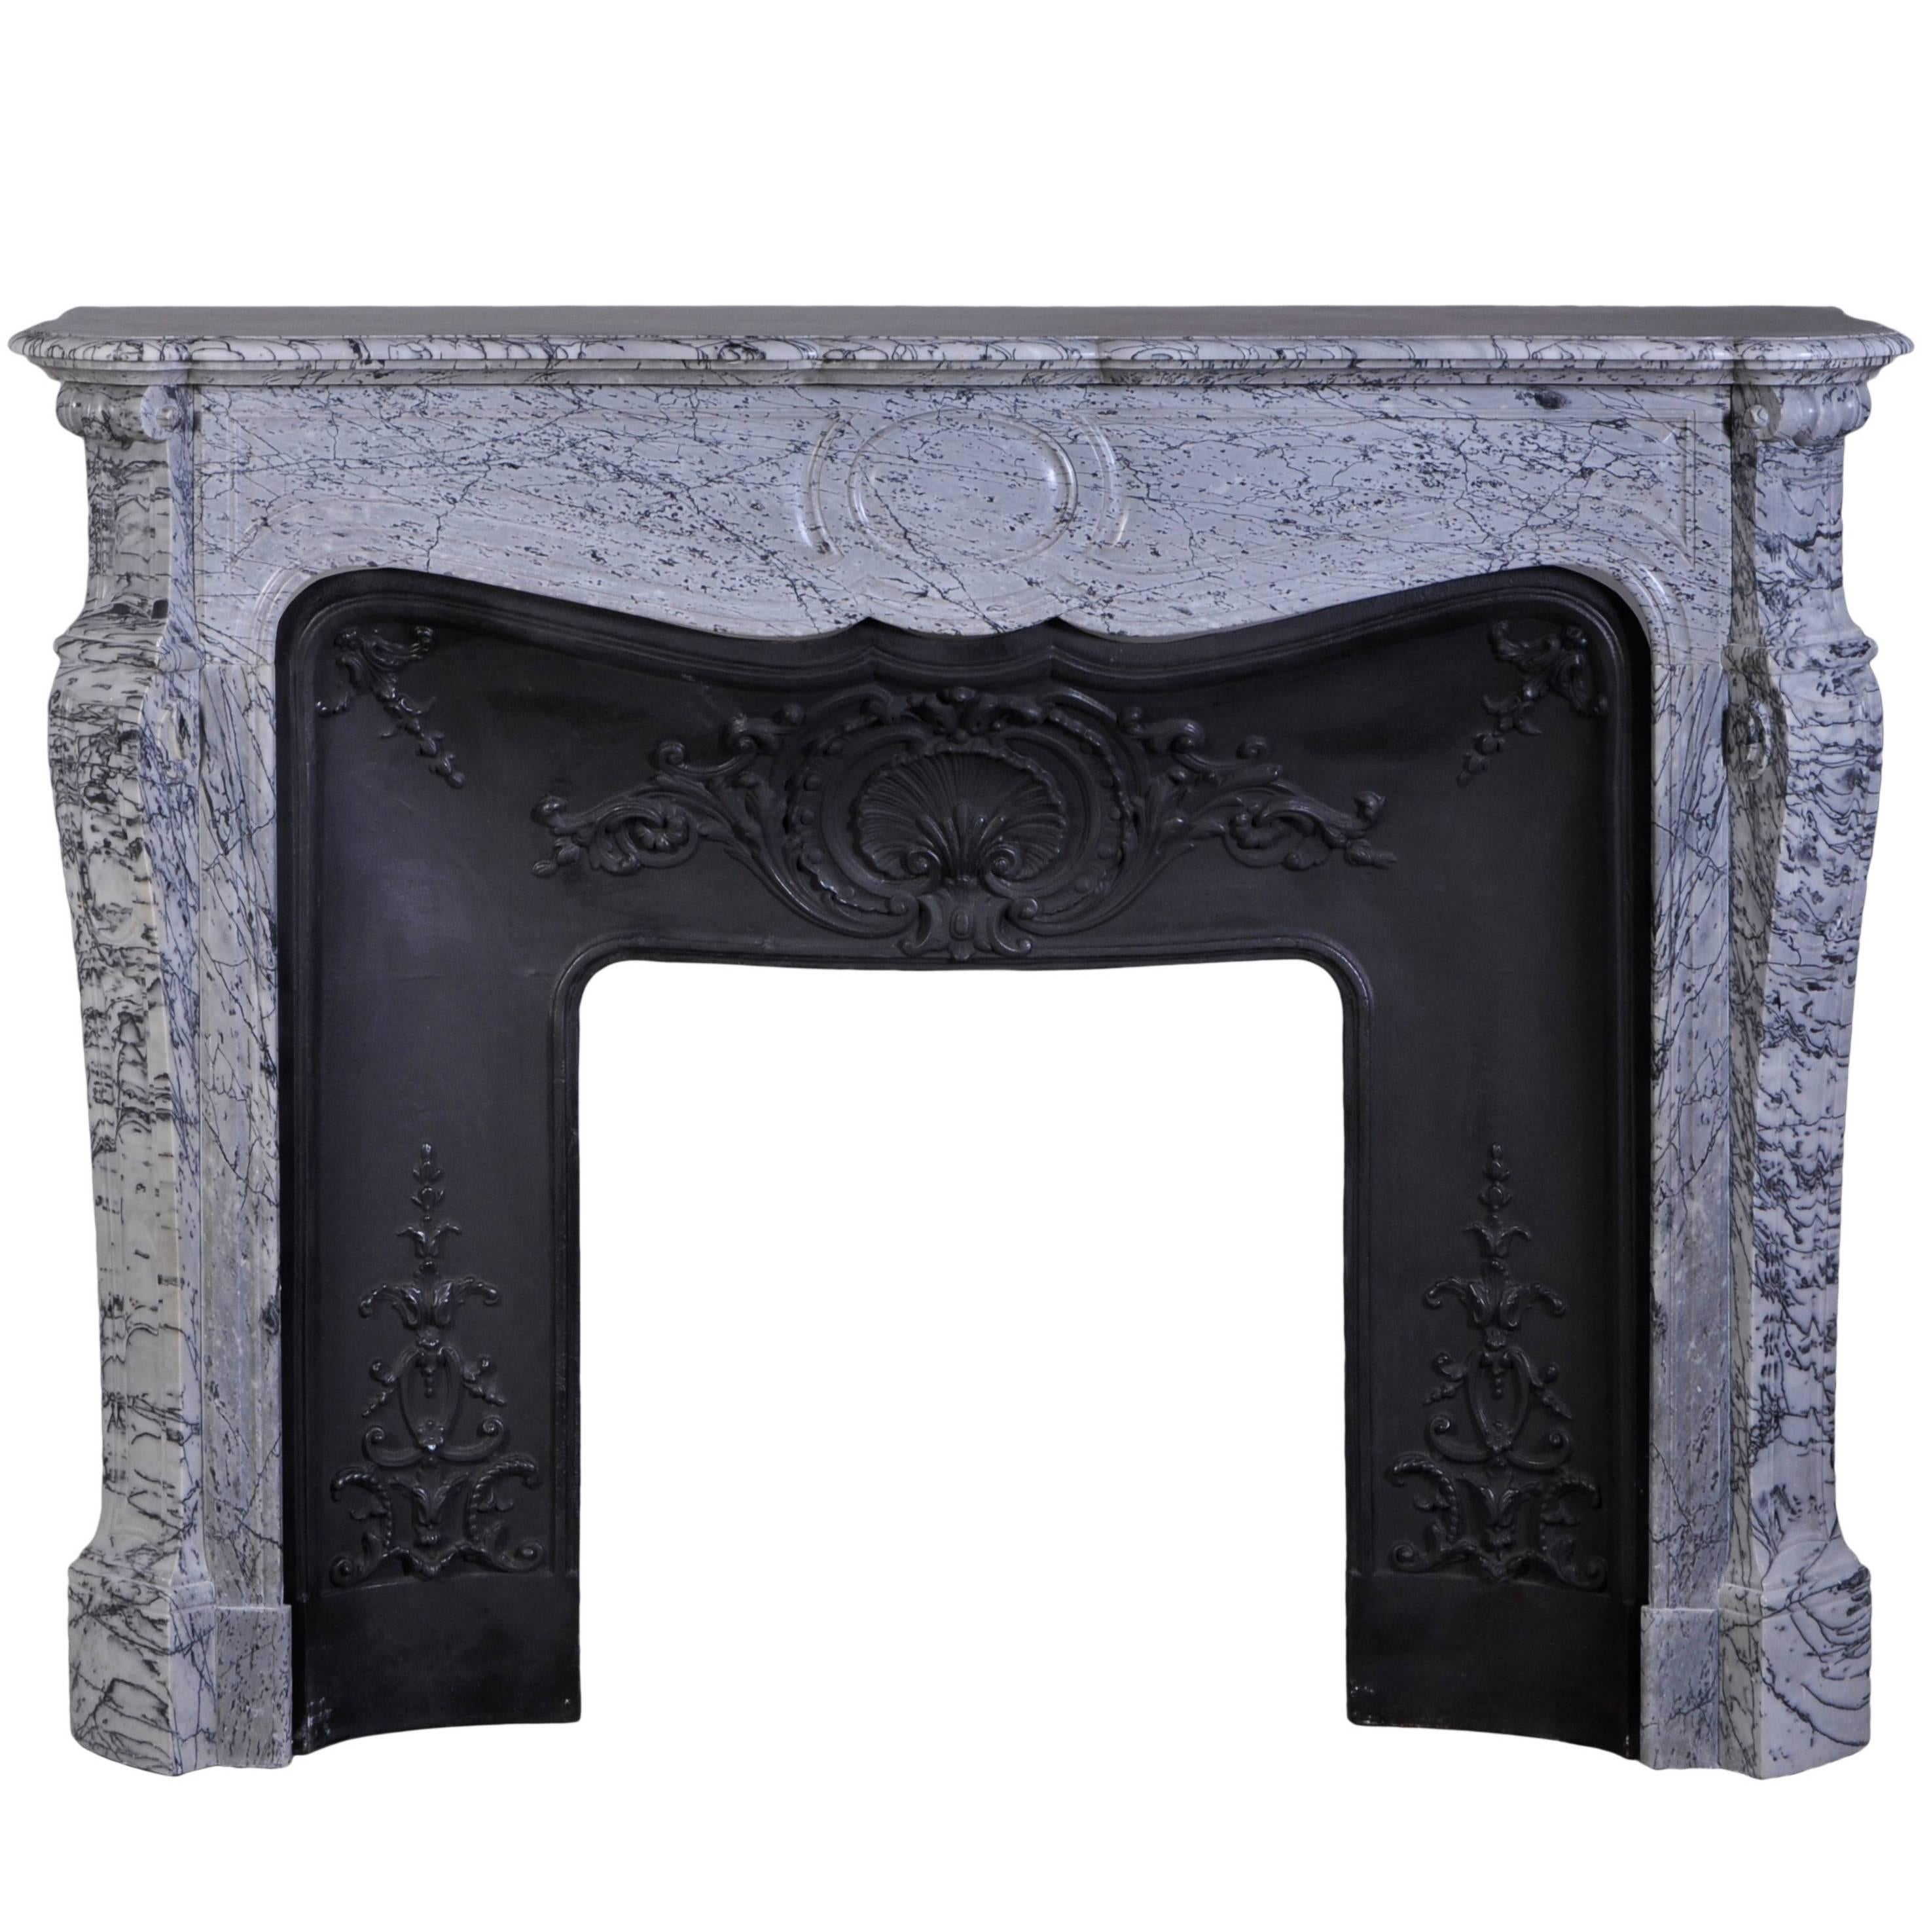 Louis XV Style Pompadour Fireplace in Bleu Fleuri Marble with Cast Iron Insert